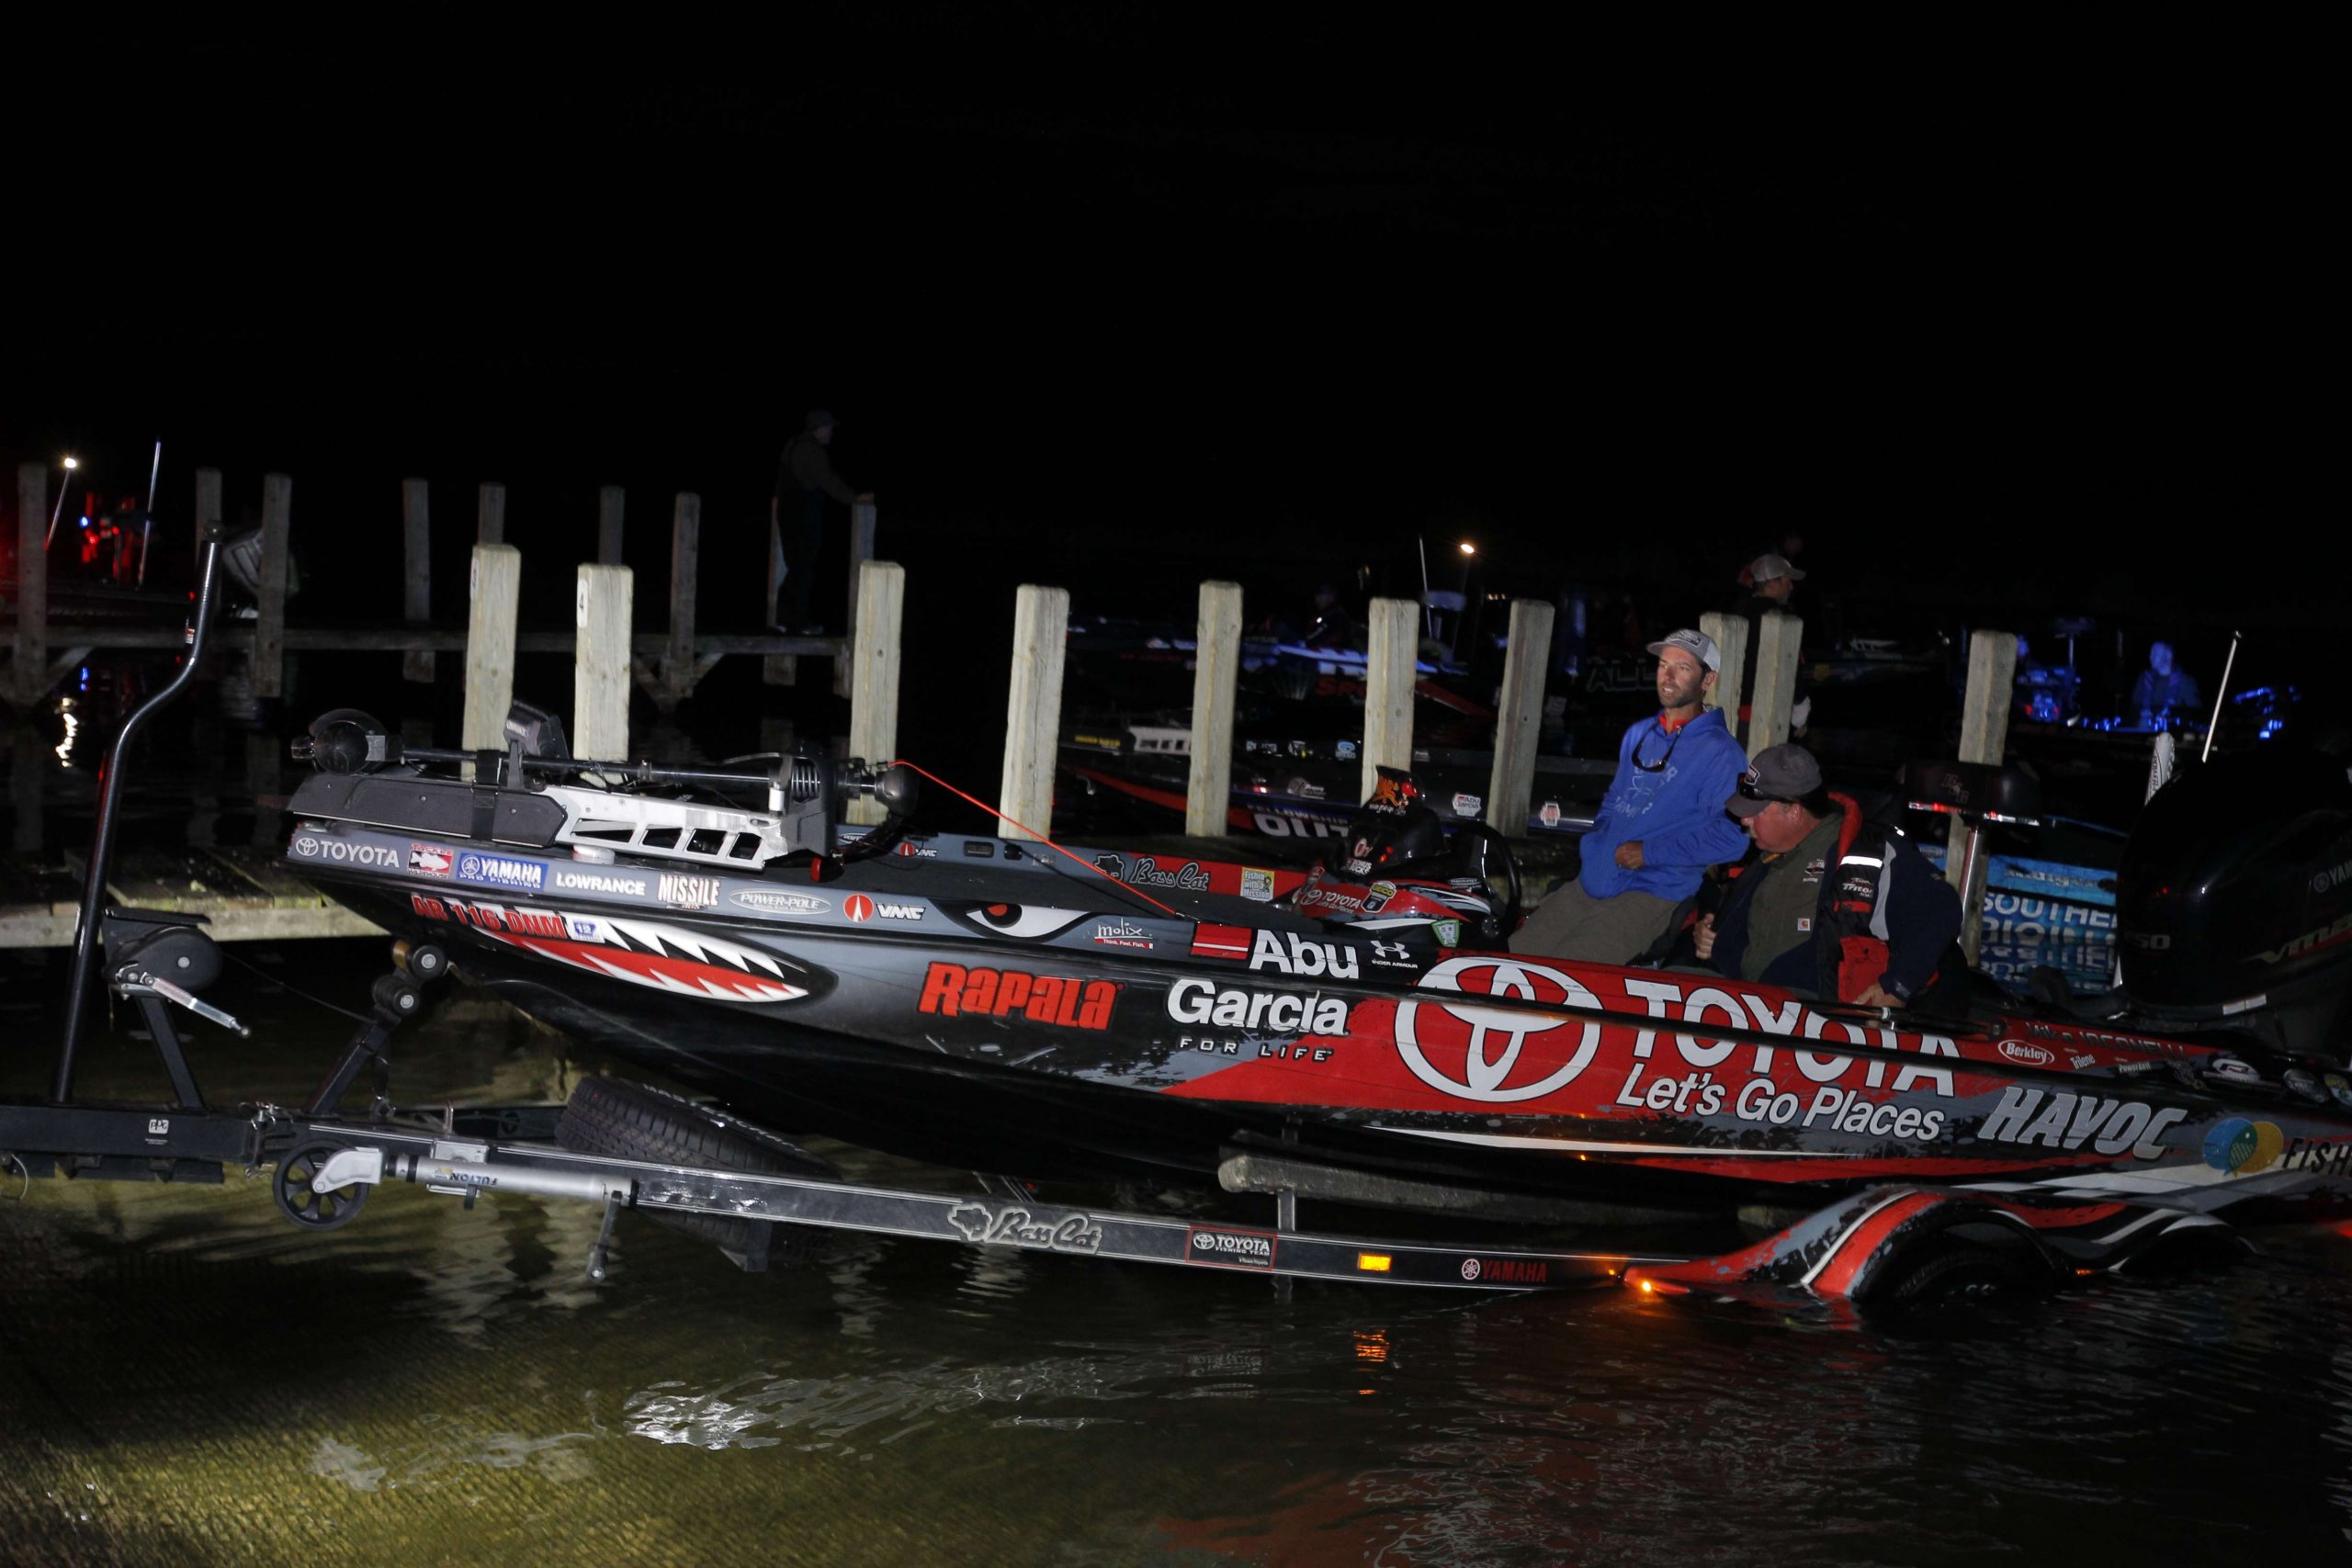 Elites like Mike Iaconelli were waiting for their turn to launch into the calm waters of Lake St. Clair.